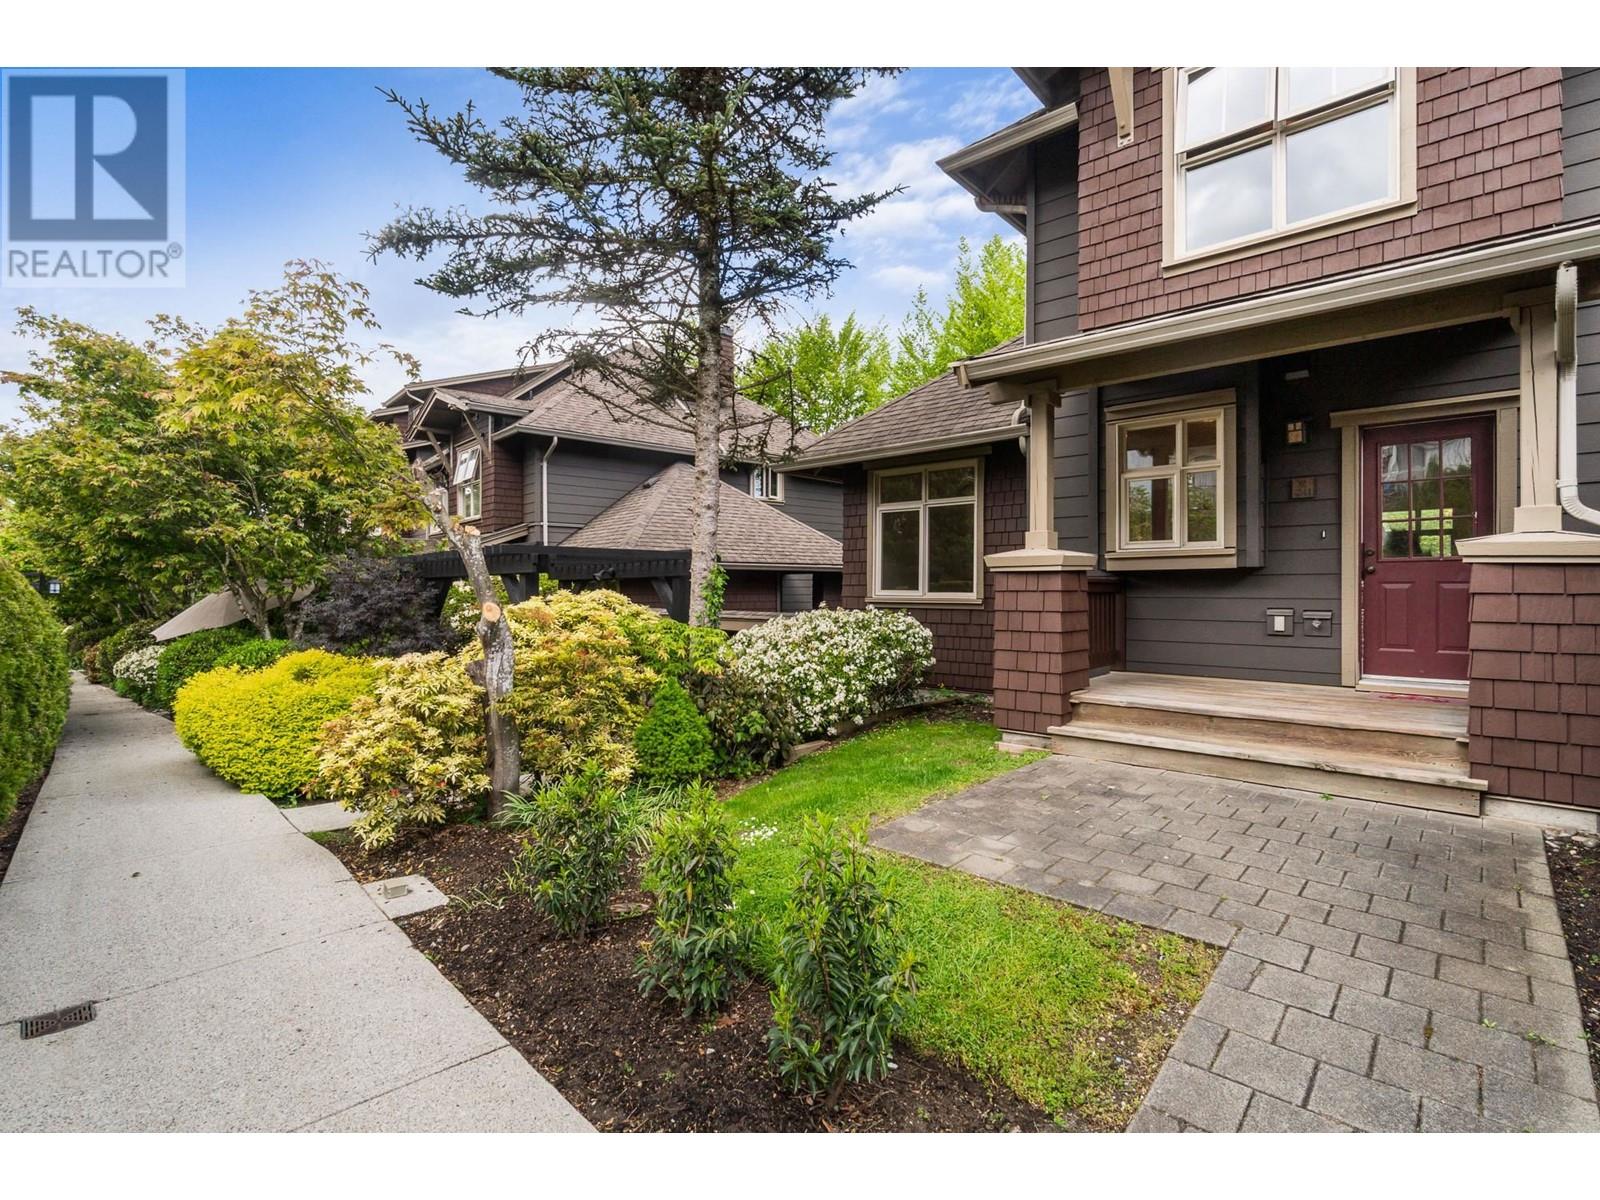 241 600 PARK CRESCENT, new westminster, British Columbia